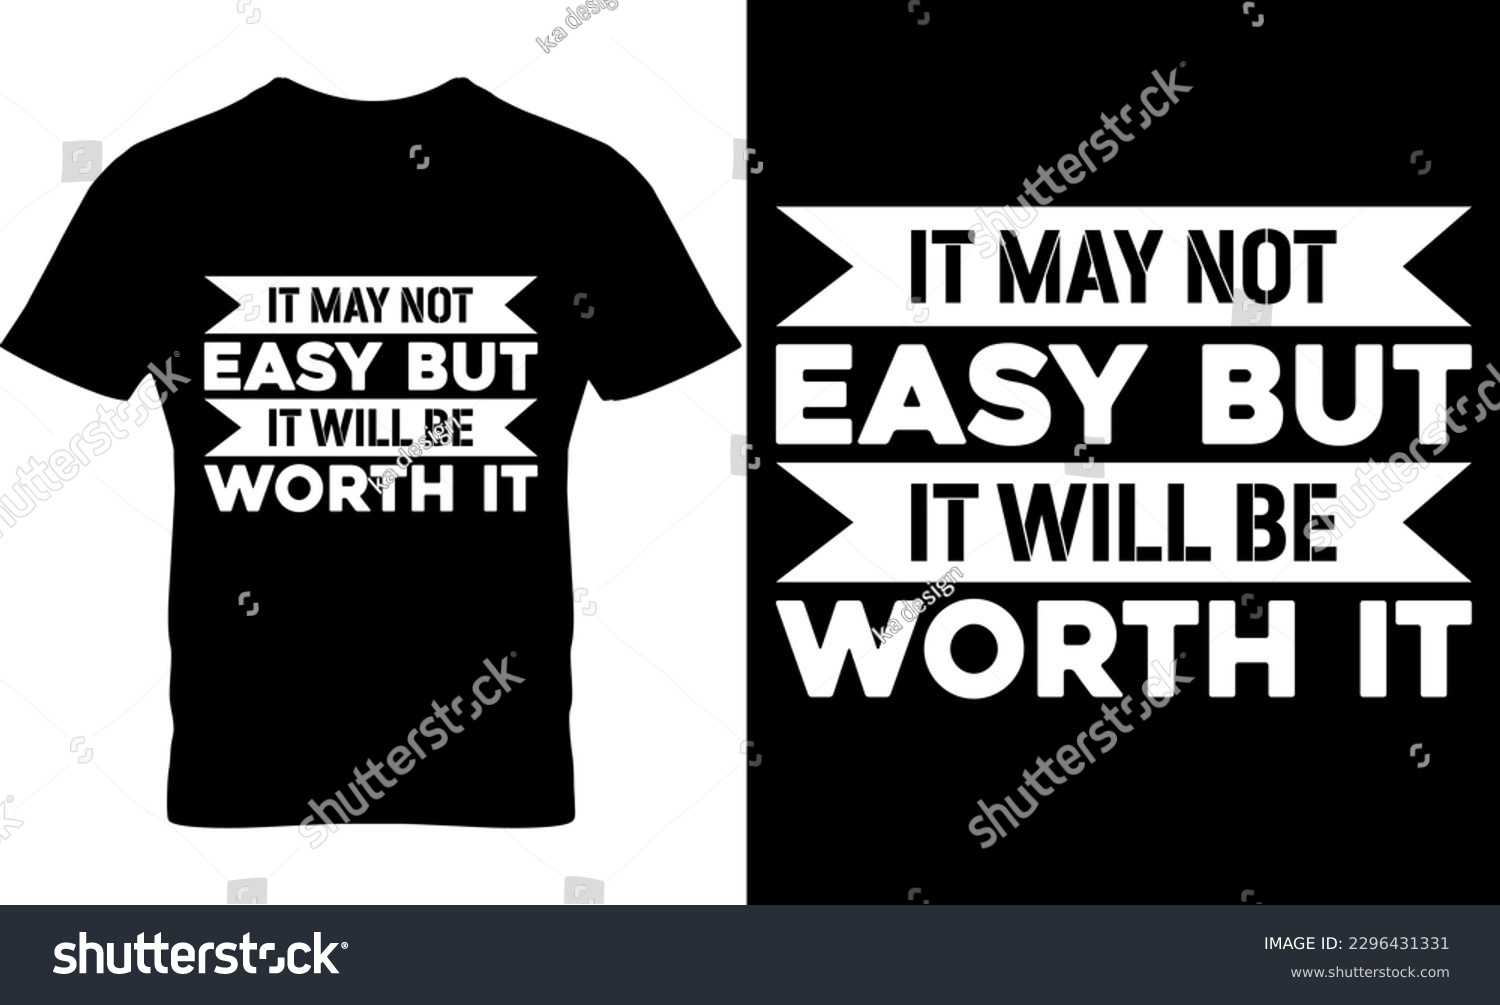 SVG of it may not easy but it will be worth it, Graphic, illustration, vector, typography, motivational, inspiration, inspiration t-shirt design, Typography t-shirt design, motivational t-shirt design, svg